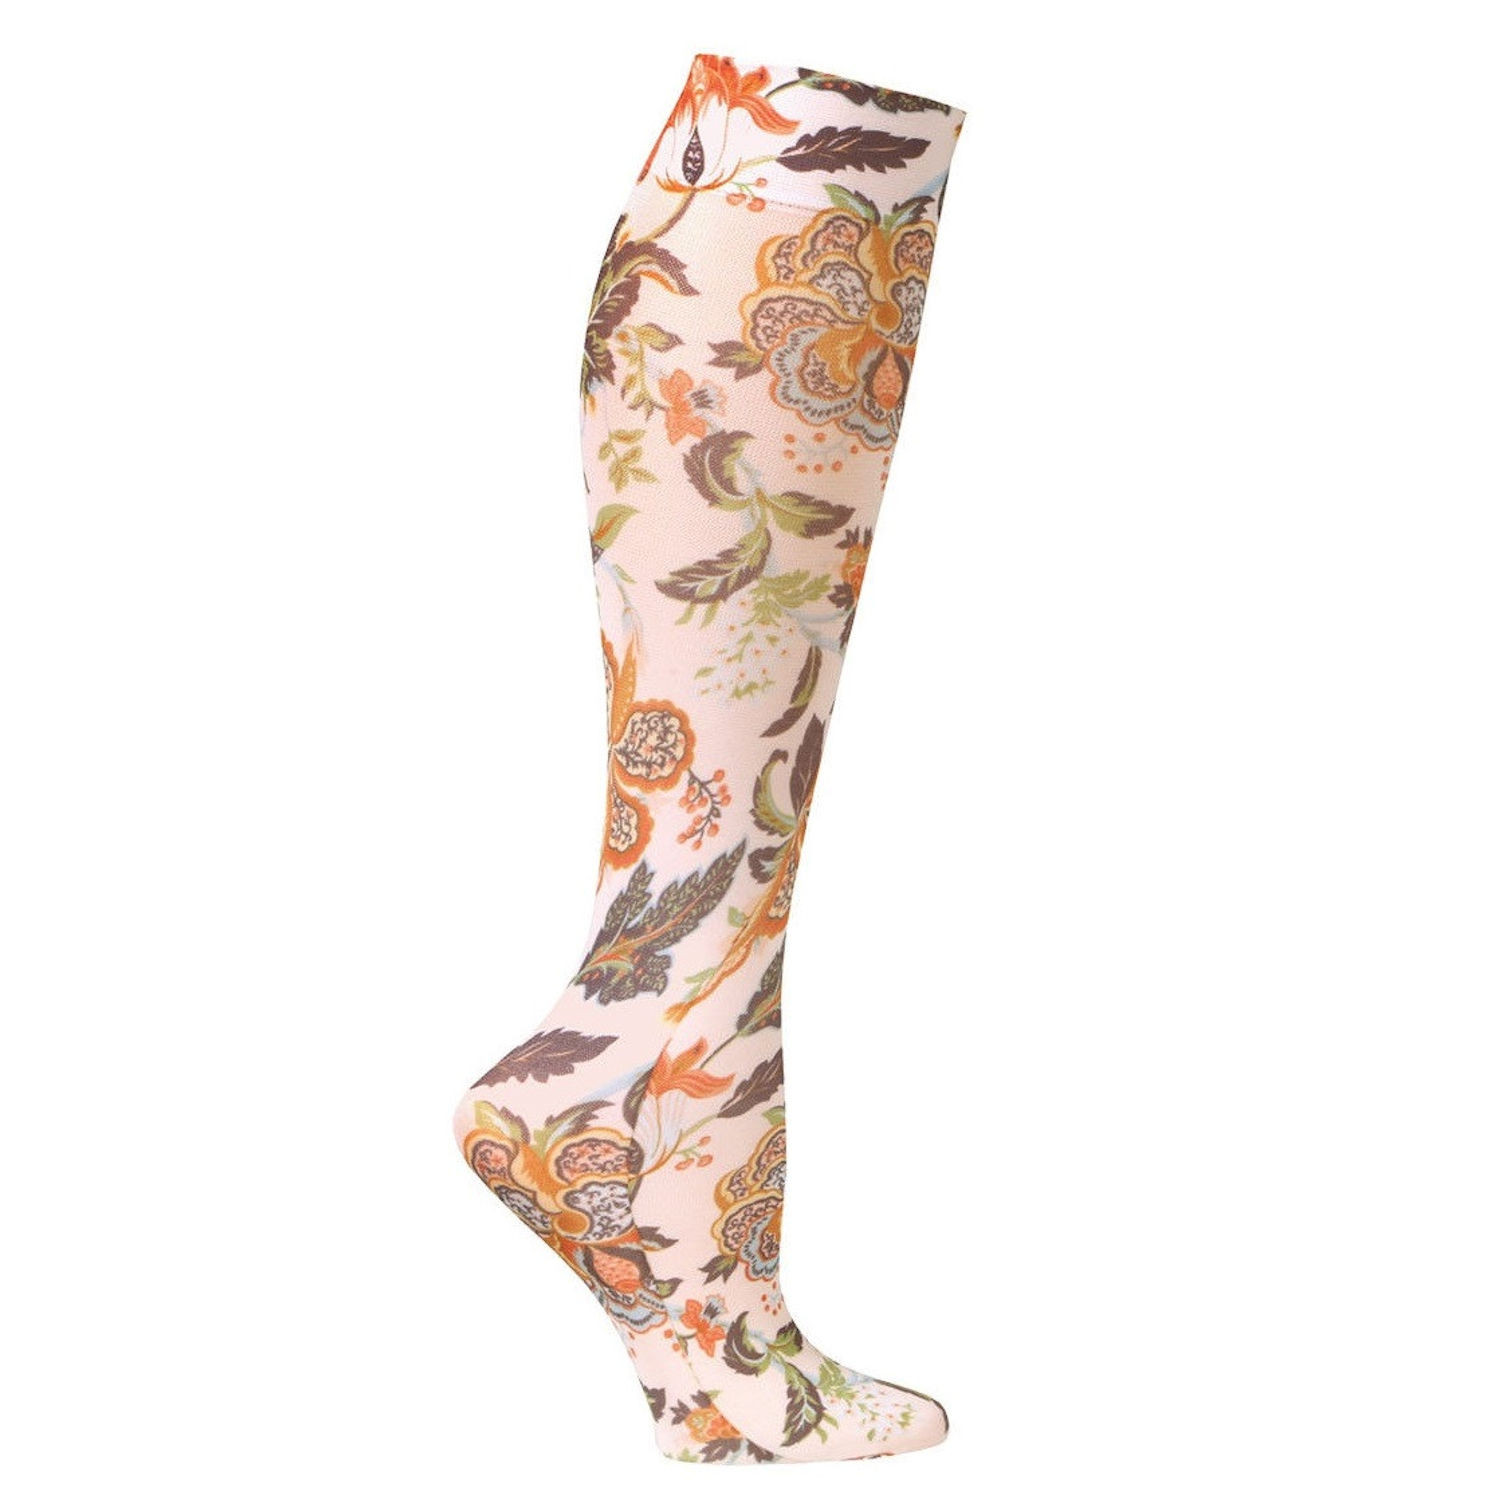 Printed Compression Knee High Stockings - Celeste Stein | Signals | FD5922